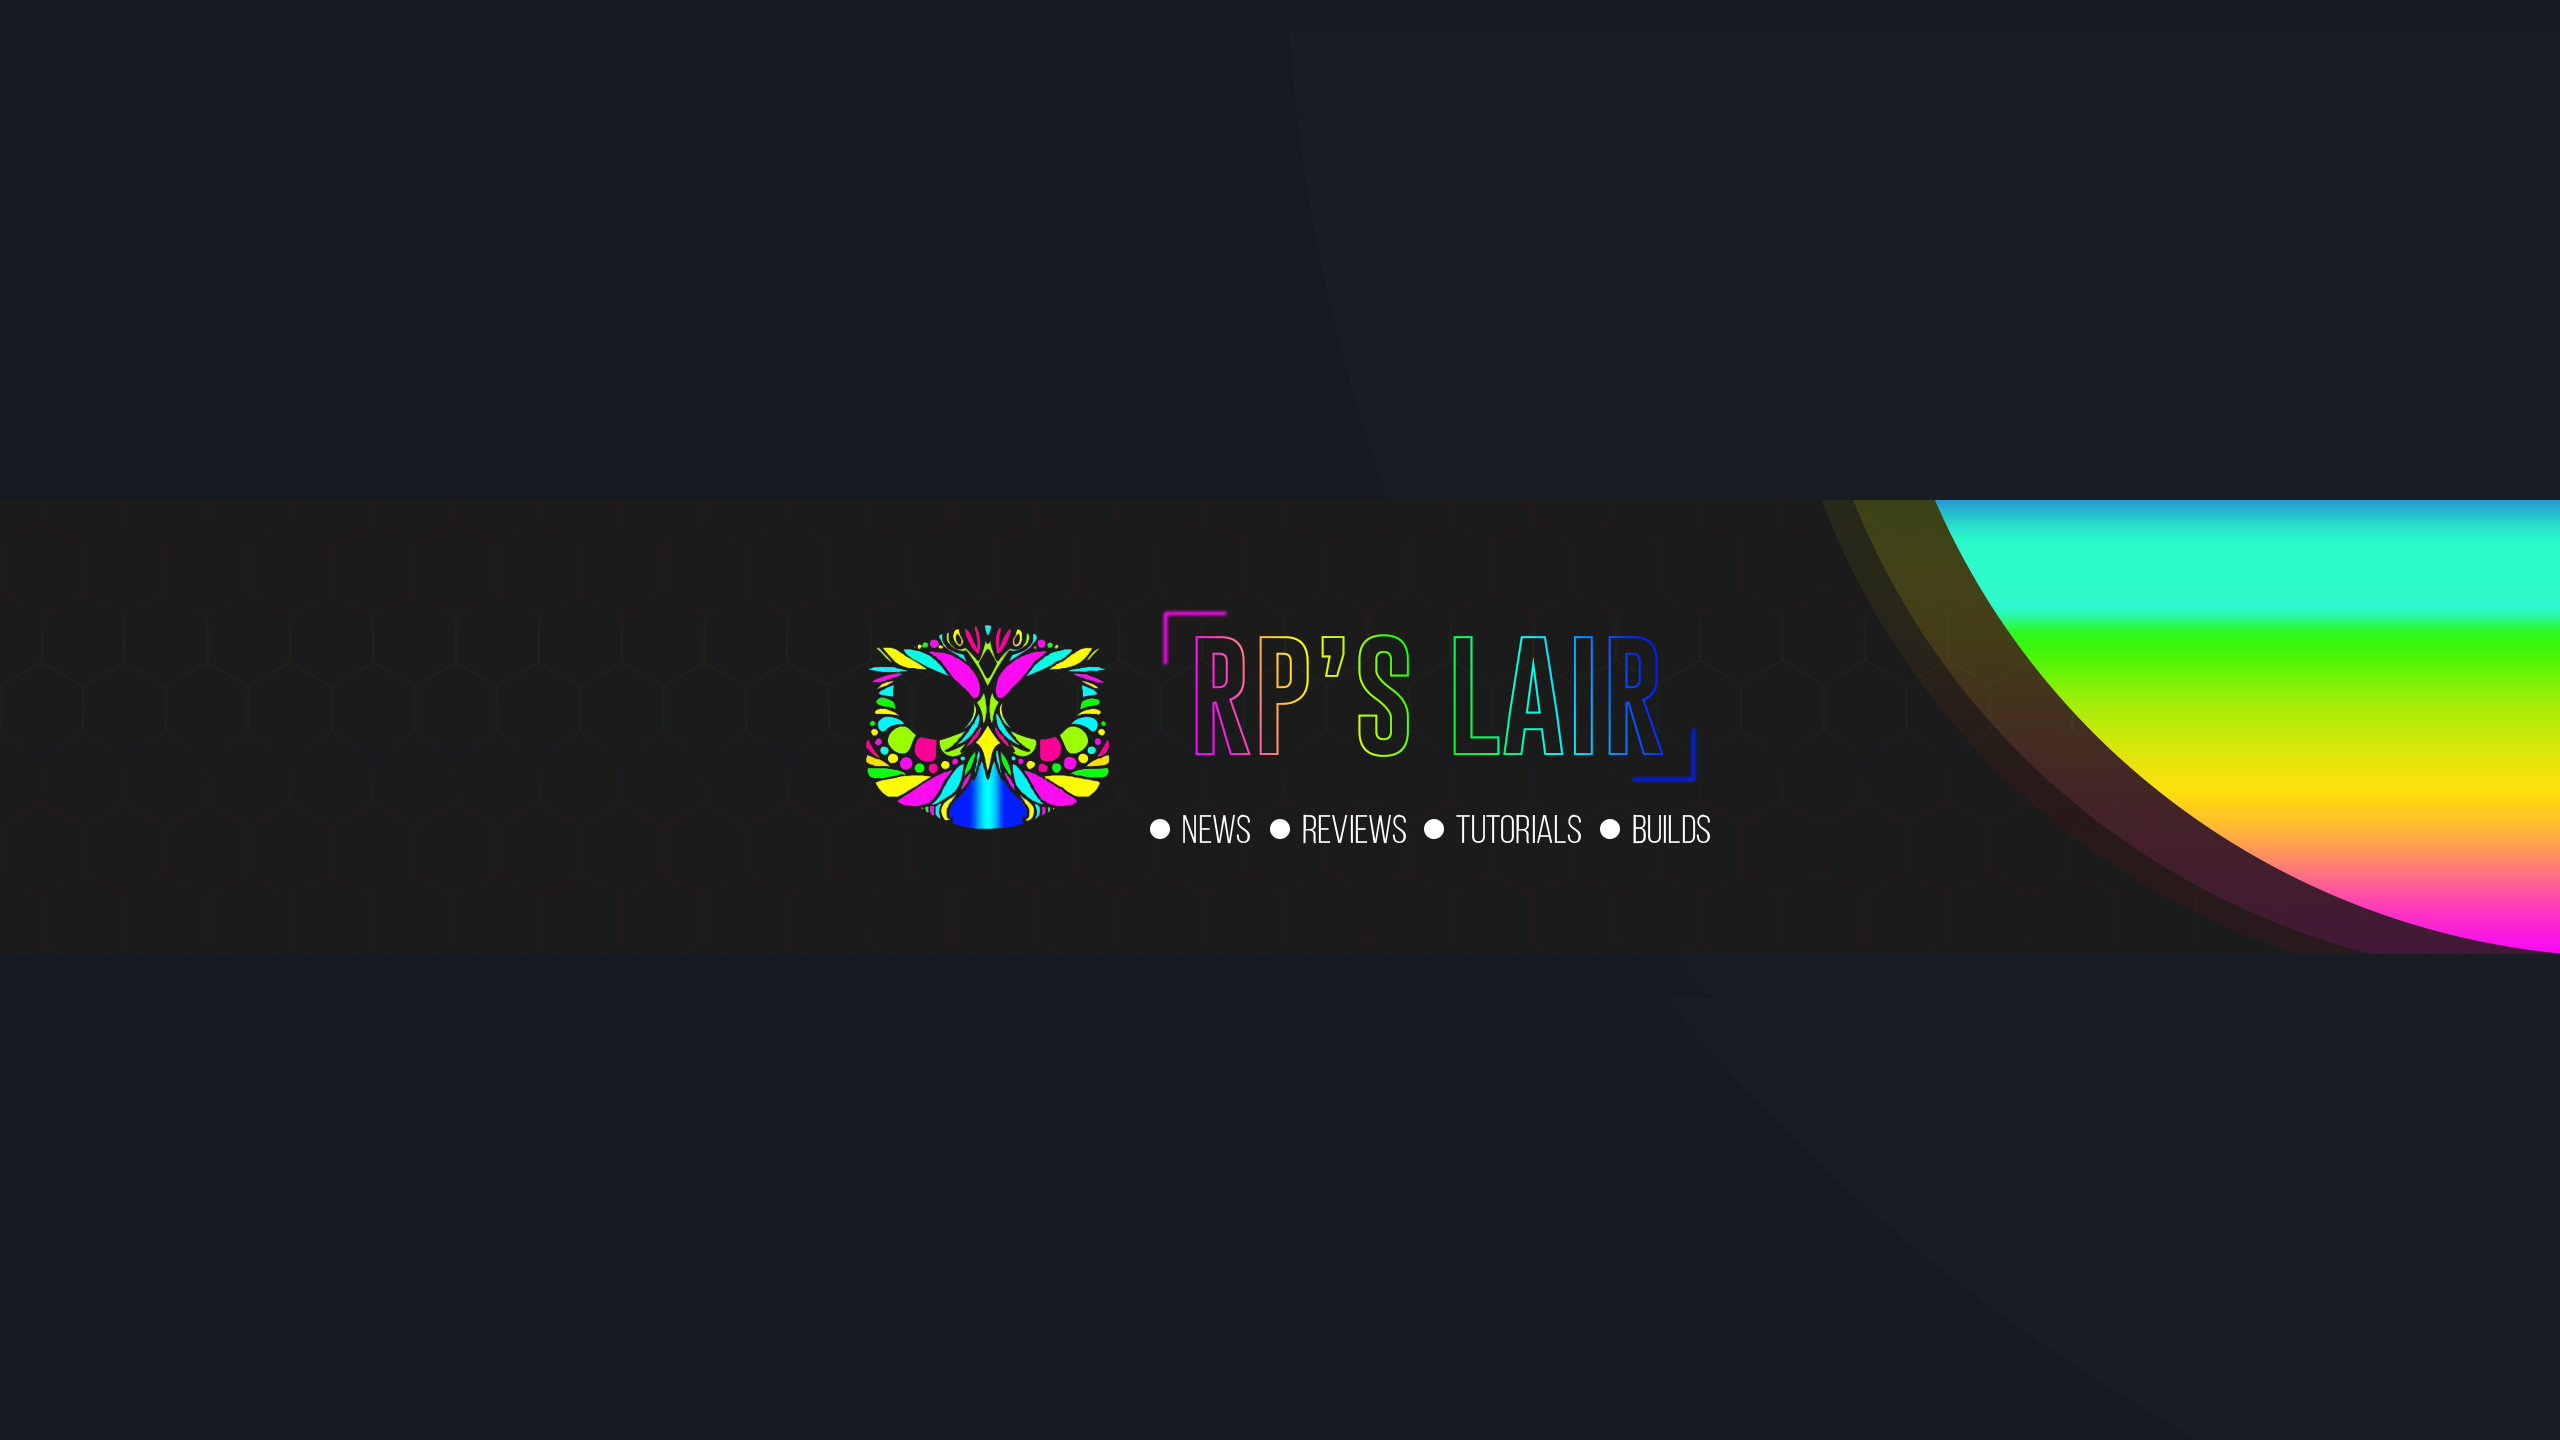 RP-s-Lair-YT-banner.png